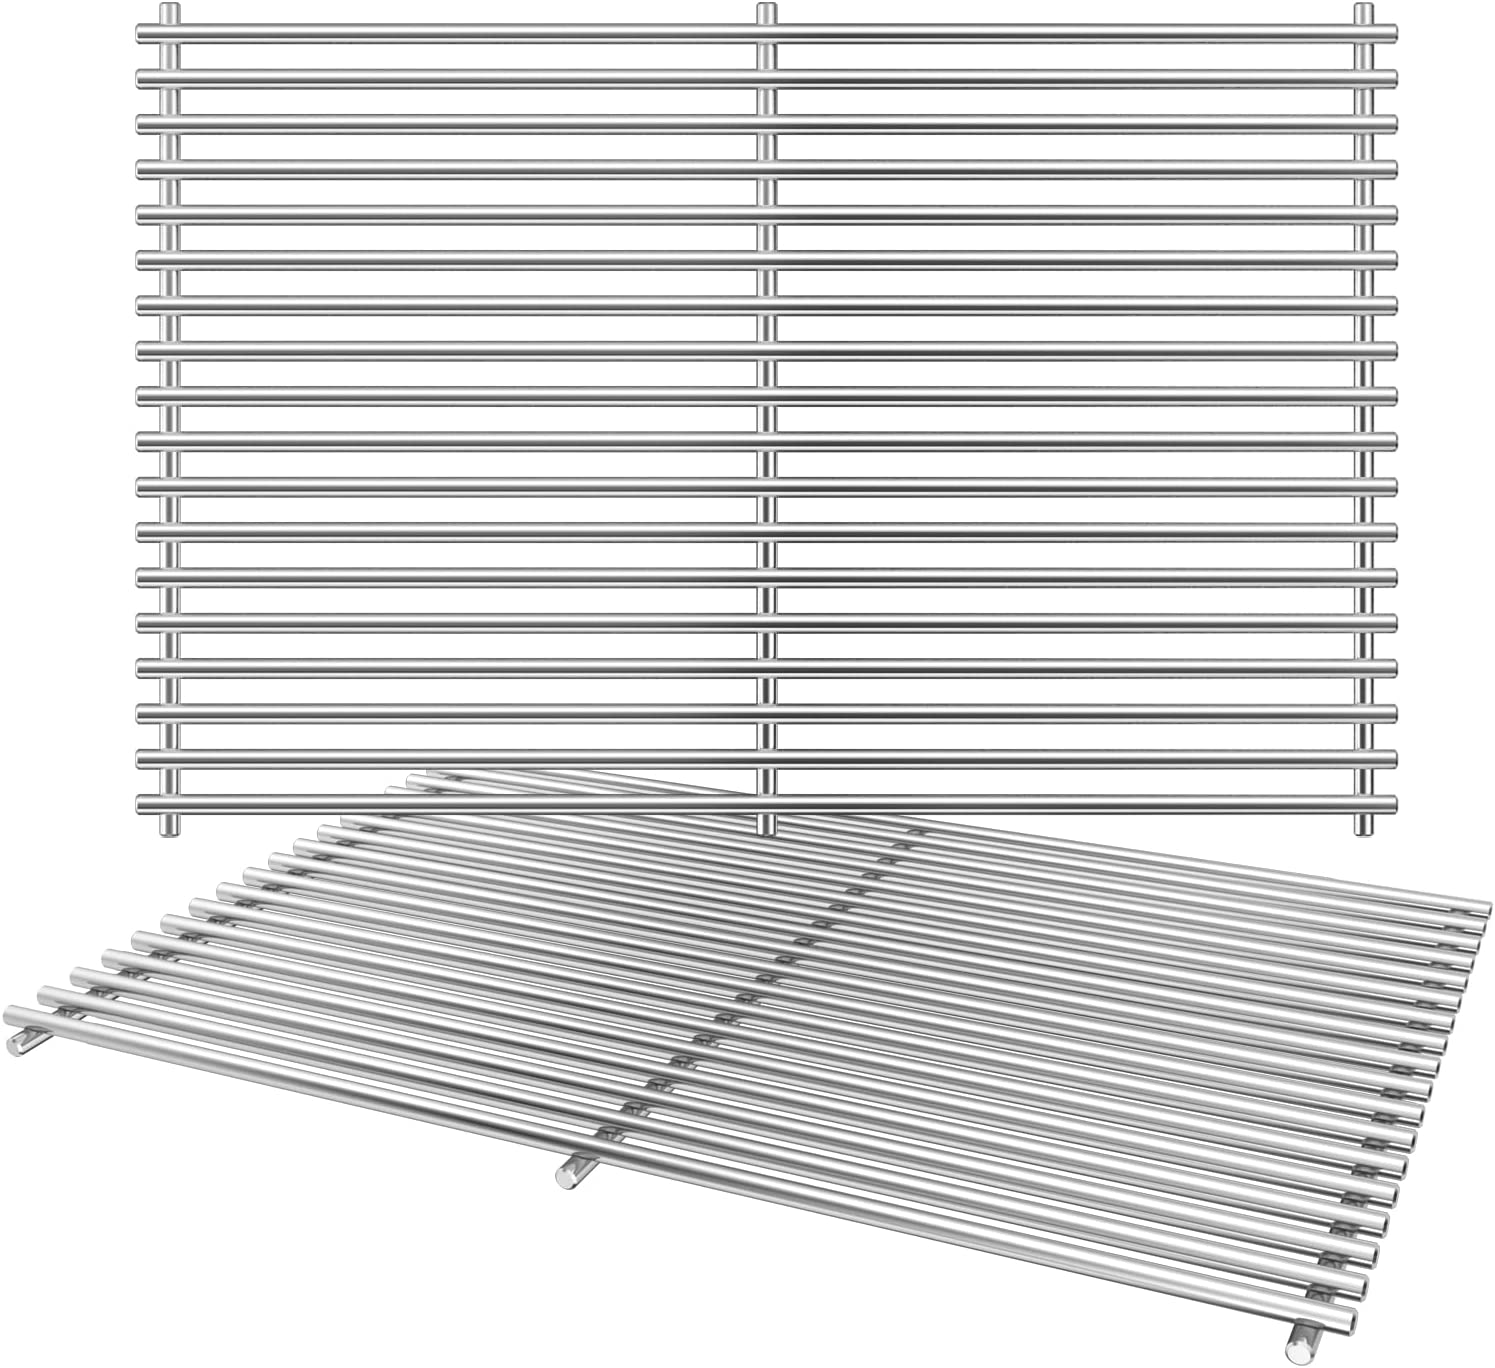 Grisun 7639 304 Stainless Steel Cooking Grates for Weber Spirit and Spirit II 300 Series Spirit E-310 E-330 E/S320 Genesis Silver/Gold B & C Genesis Platinum B & C Grill Replacement Part Grates 17.3" - image 5 of 13